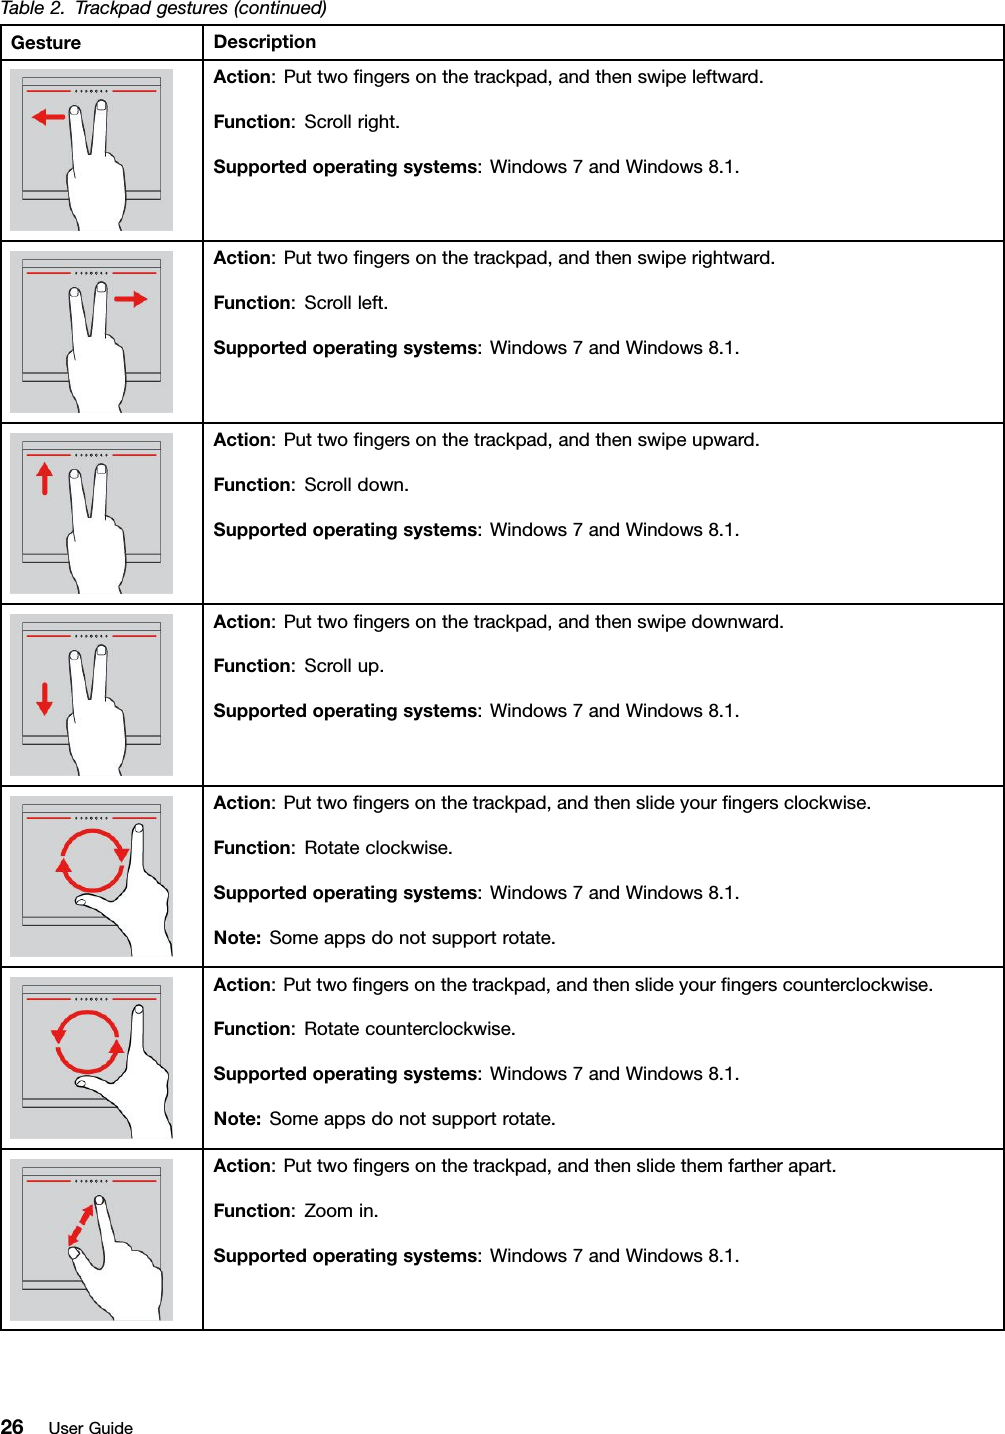 Table 2. Trackpad gestures (continued)Gesture DescriptionAction: Put two ﬁngers on the trackpad, and then swipe leftward.Function: Scroll right.Supported operating systems: Windows 7 and Windows 8.1.Action: Put two ﬁngers on the trackpad, and then swipe rightward.Function: Scroll left.Supported operating systems: Windows 7 and Windows 8.1.Action: Put two ﬁngers on the trackpad, and then swipe upward.Function: Scroll down.Supported operating systems: Windows 7 and Windows 8.1.Action: Put two ﬁngers on the trackpad, and then swipe downward.Function: Scroll up.Supported operating systems: Windows 7 and Windows 8.1.Action: Put two ﬁngers on the trackpad, and then slide your ﬁngers clockwise.Function: Rotate clockwise.Supported operating systems: Windows 7 and Windows 8.1.Note: Some apps do not support rotate.Action: Put two ﬁngers on the trackpad, and then slide your ﬁngers counterclockwise.Function: Rotate counterclockwise.Supported operating systems: Windows 7 and Windows 8.1.Note: Some apps do not support rotate.Action: Put two ﬁngers on the trackpad, and then slide them farther apart.Function: Zoom in.Supported operating systems: Windows 7 and Windows 8.1.26 User Guide